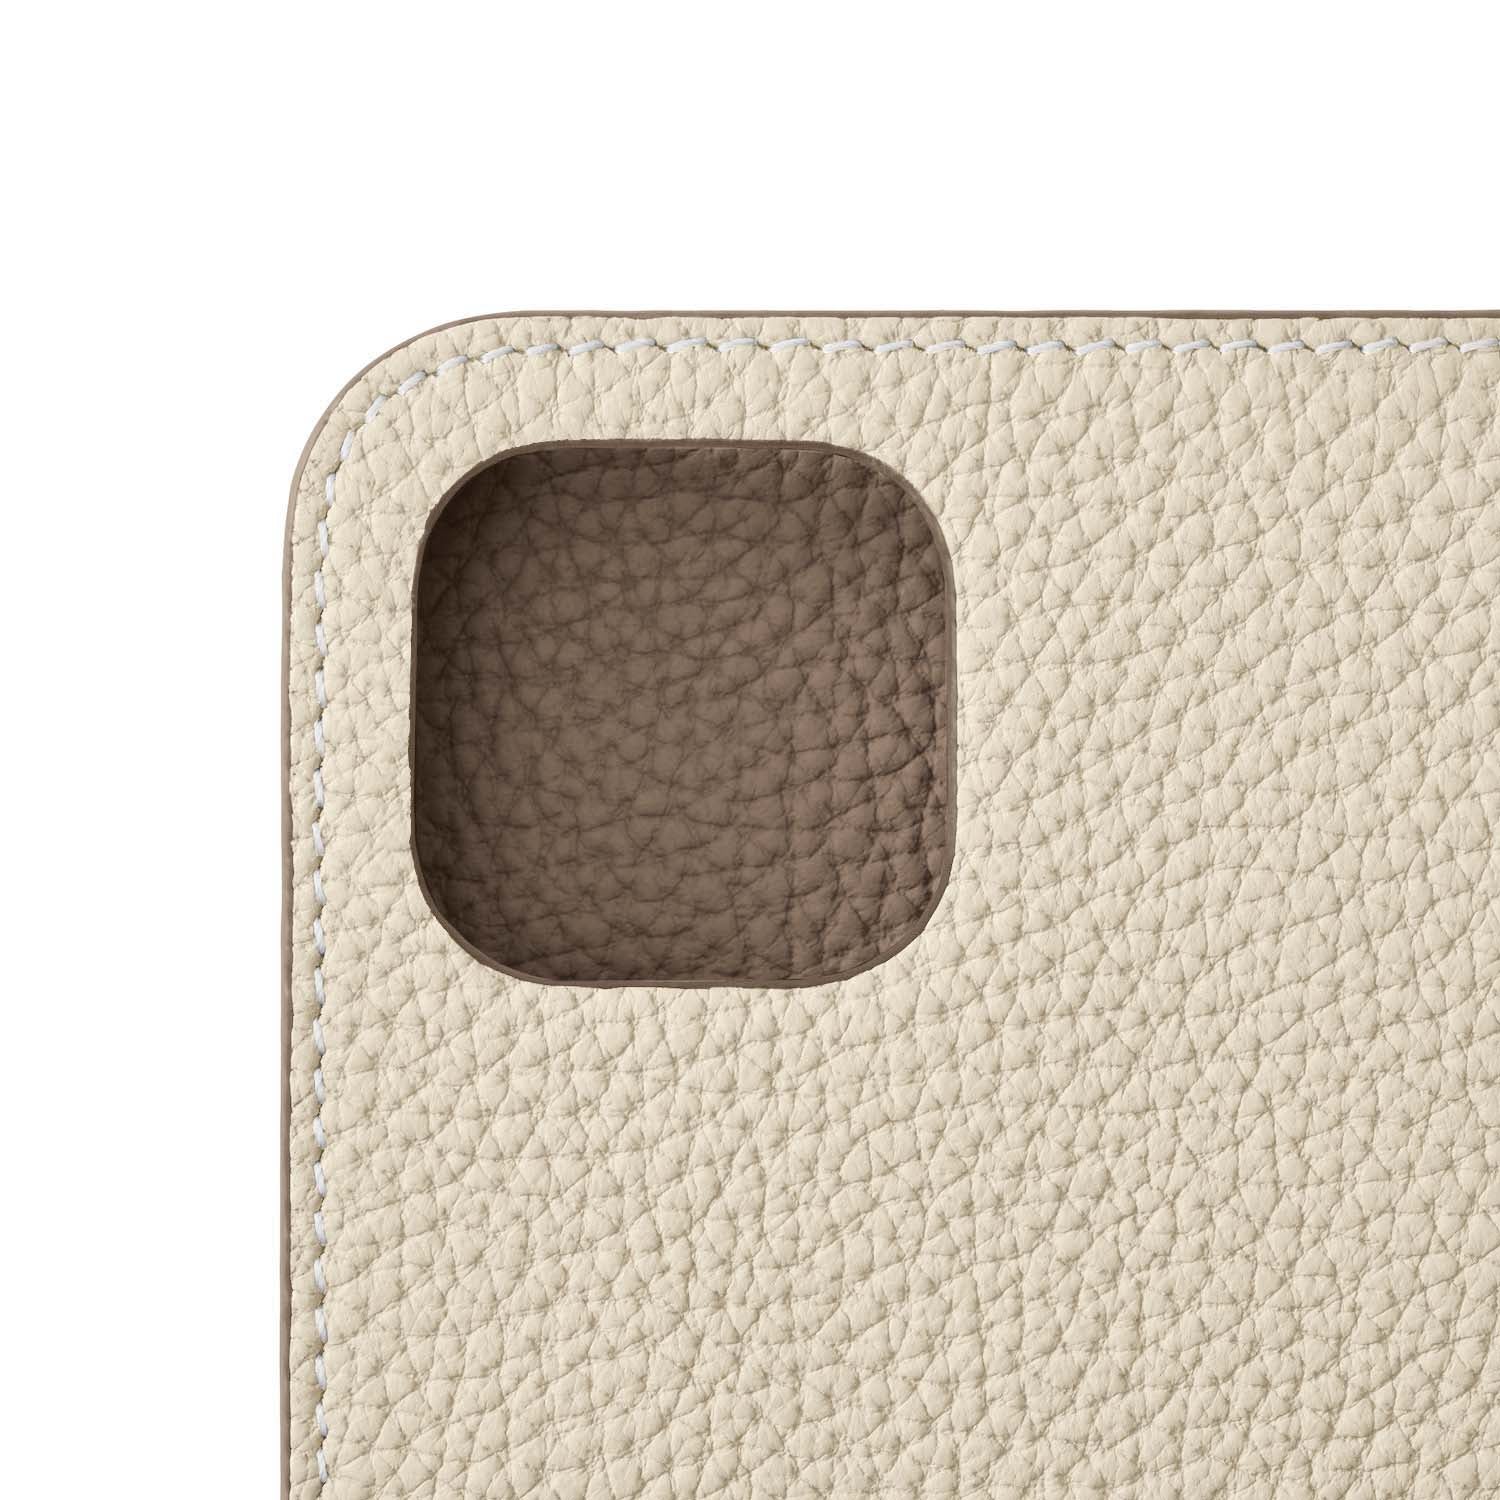 (iPhone 15) Diary case in shrink leather